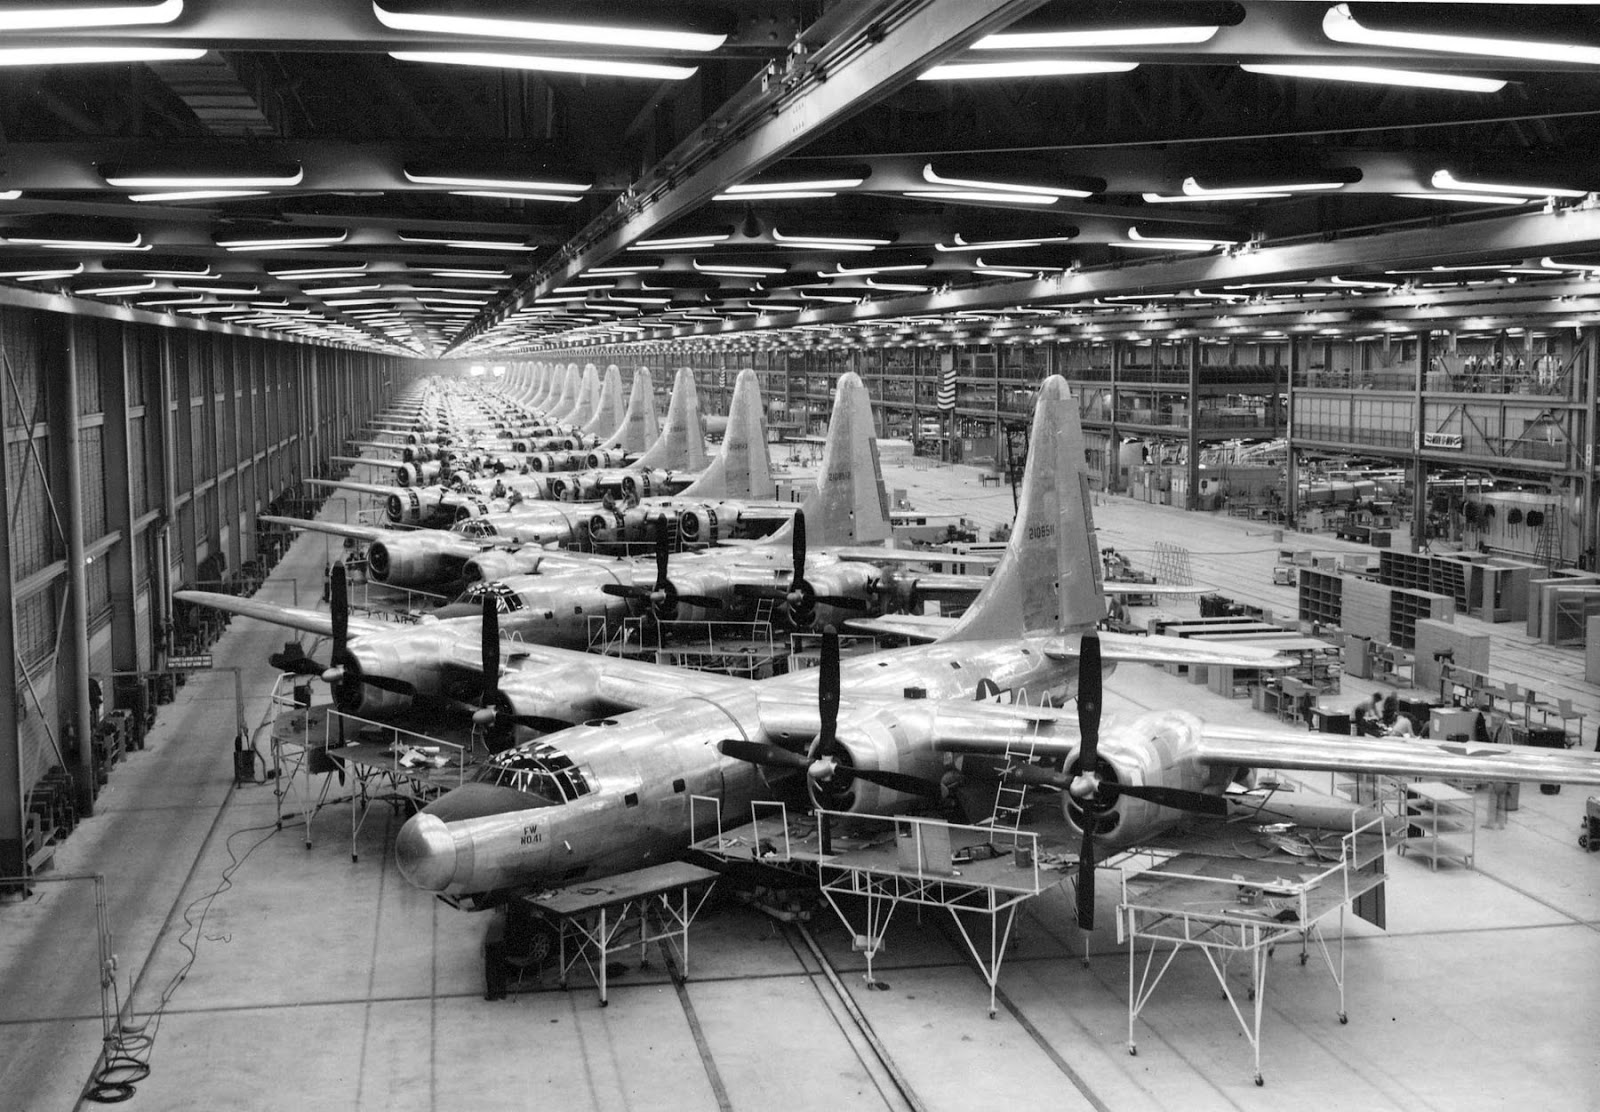 B-32 Bomber Factory in Fort Worth, Texas 1944.